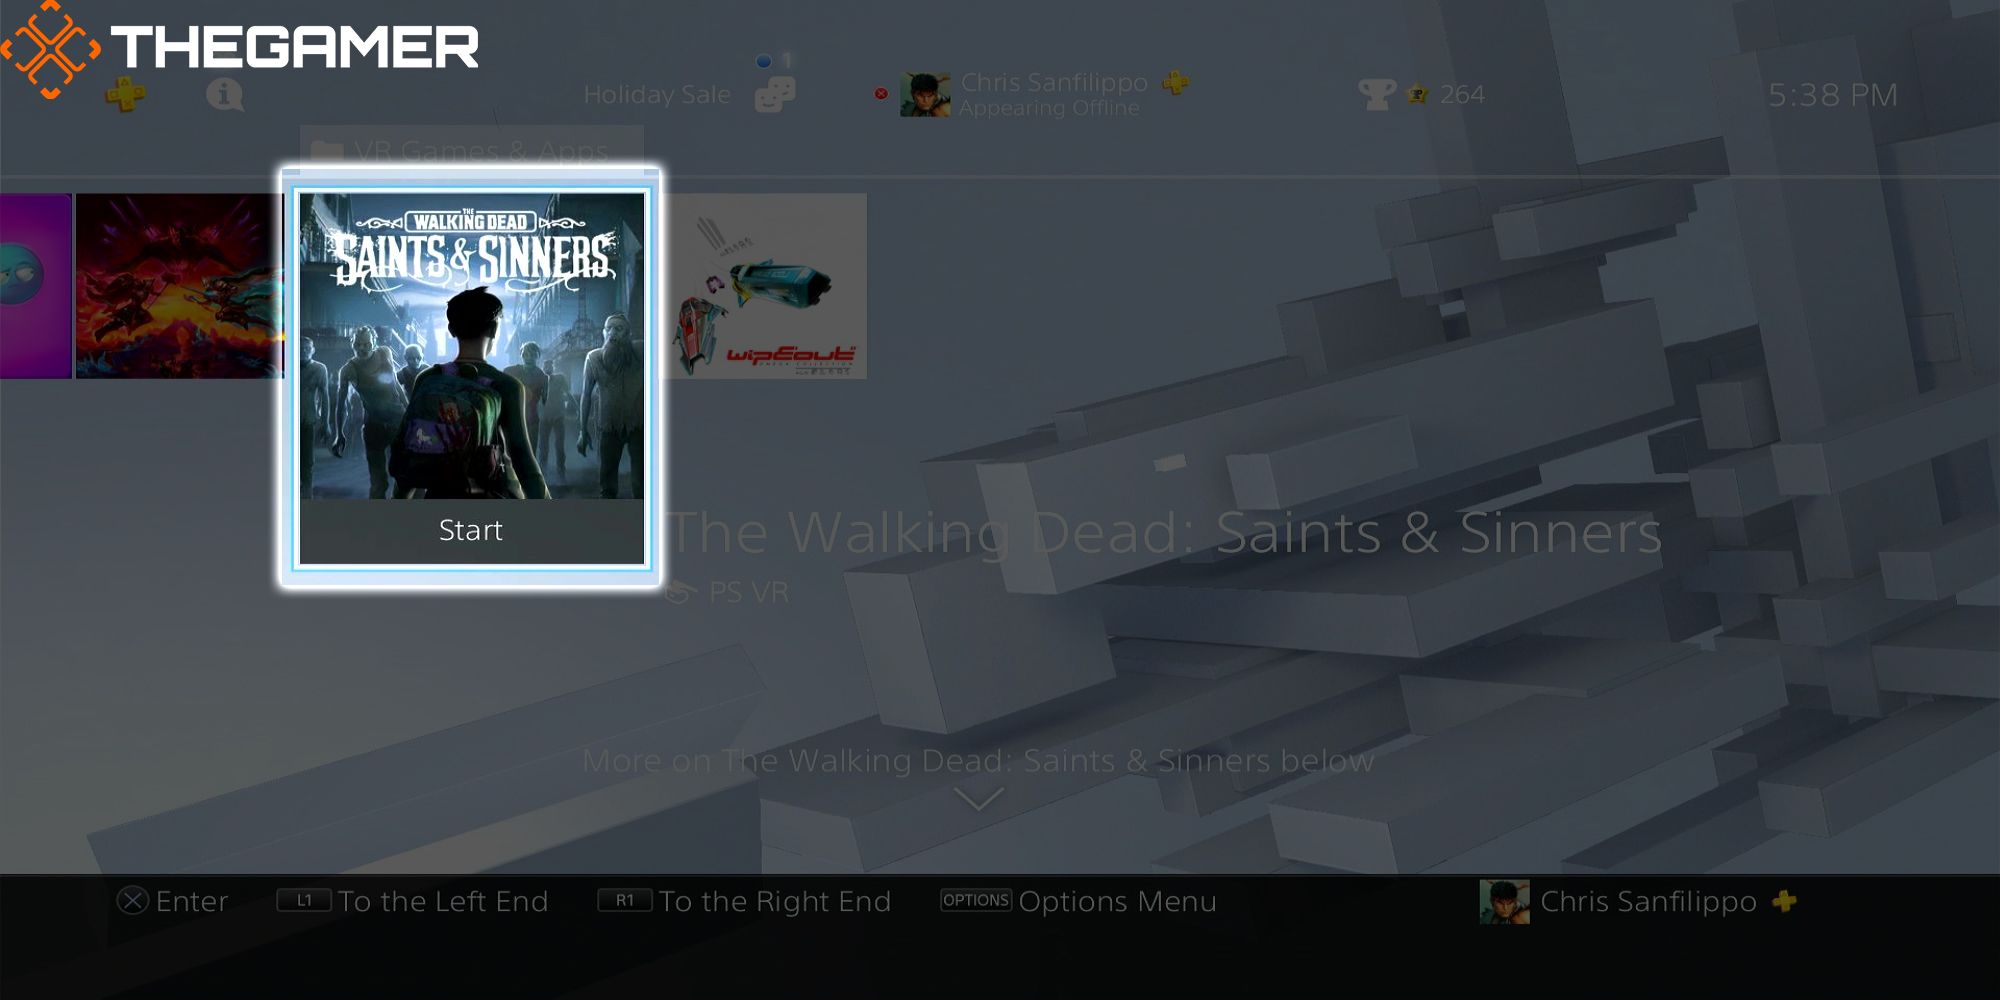 The Walking Dead Saints And Sinners start icon in the VR Games Folder of Chris's Sad PS4 Home Page.